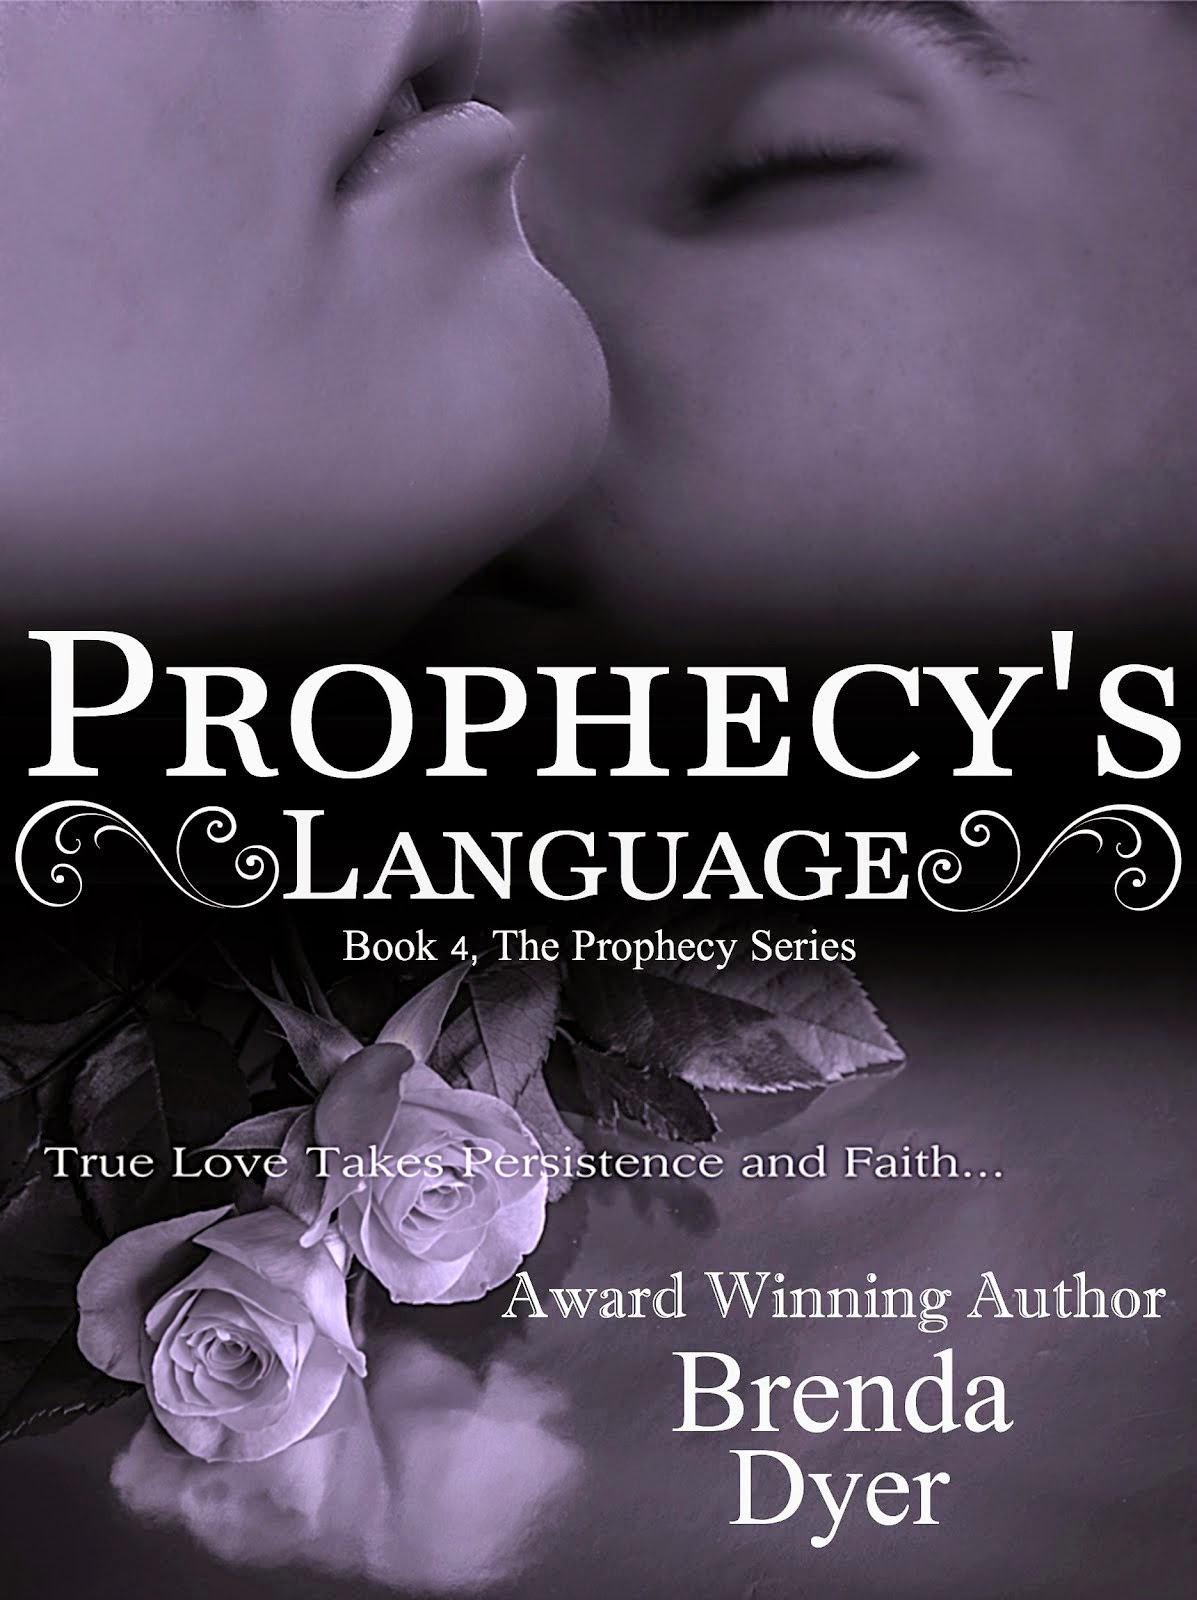 Prophecy's Language, Book #4 in the Prophecy Series